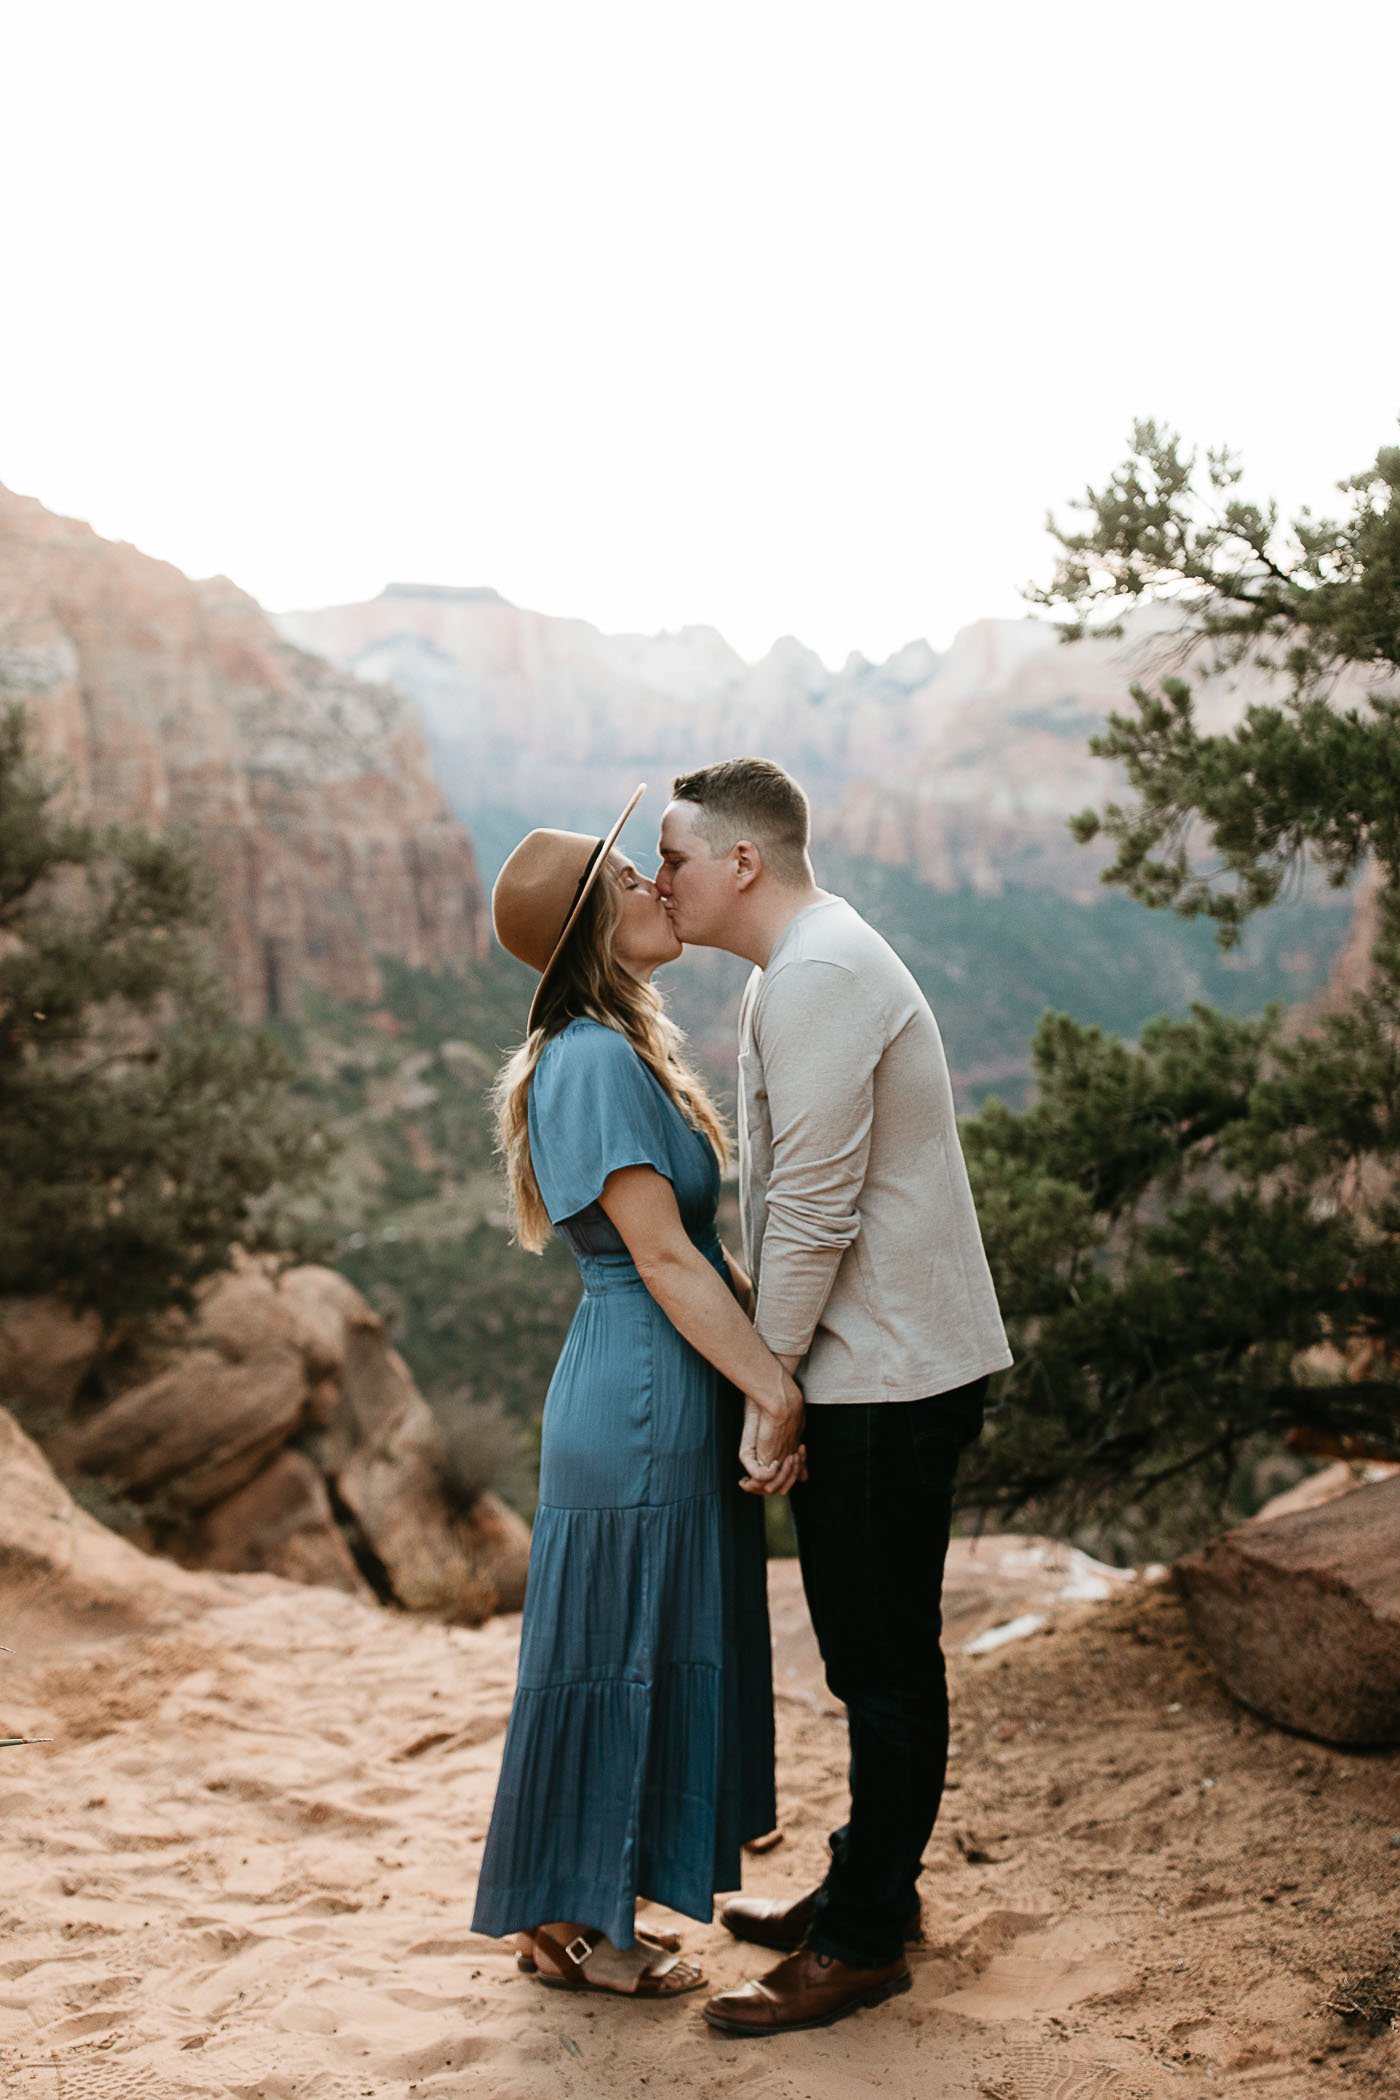  A woman in a brown wide brim hat and blue dress kisses her partner in a long grey t shirt on the Zion Canyon overlook trail. There are green trees and red rock canyons behind them. 